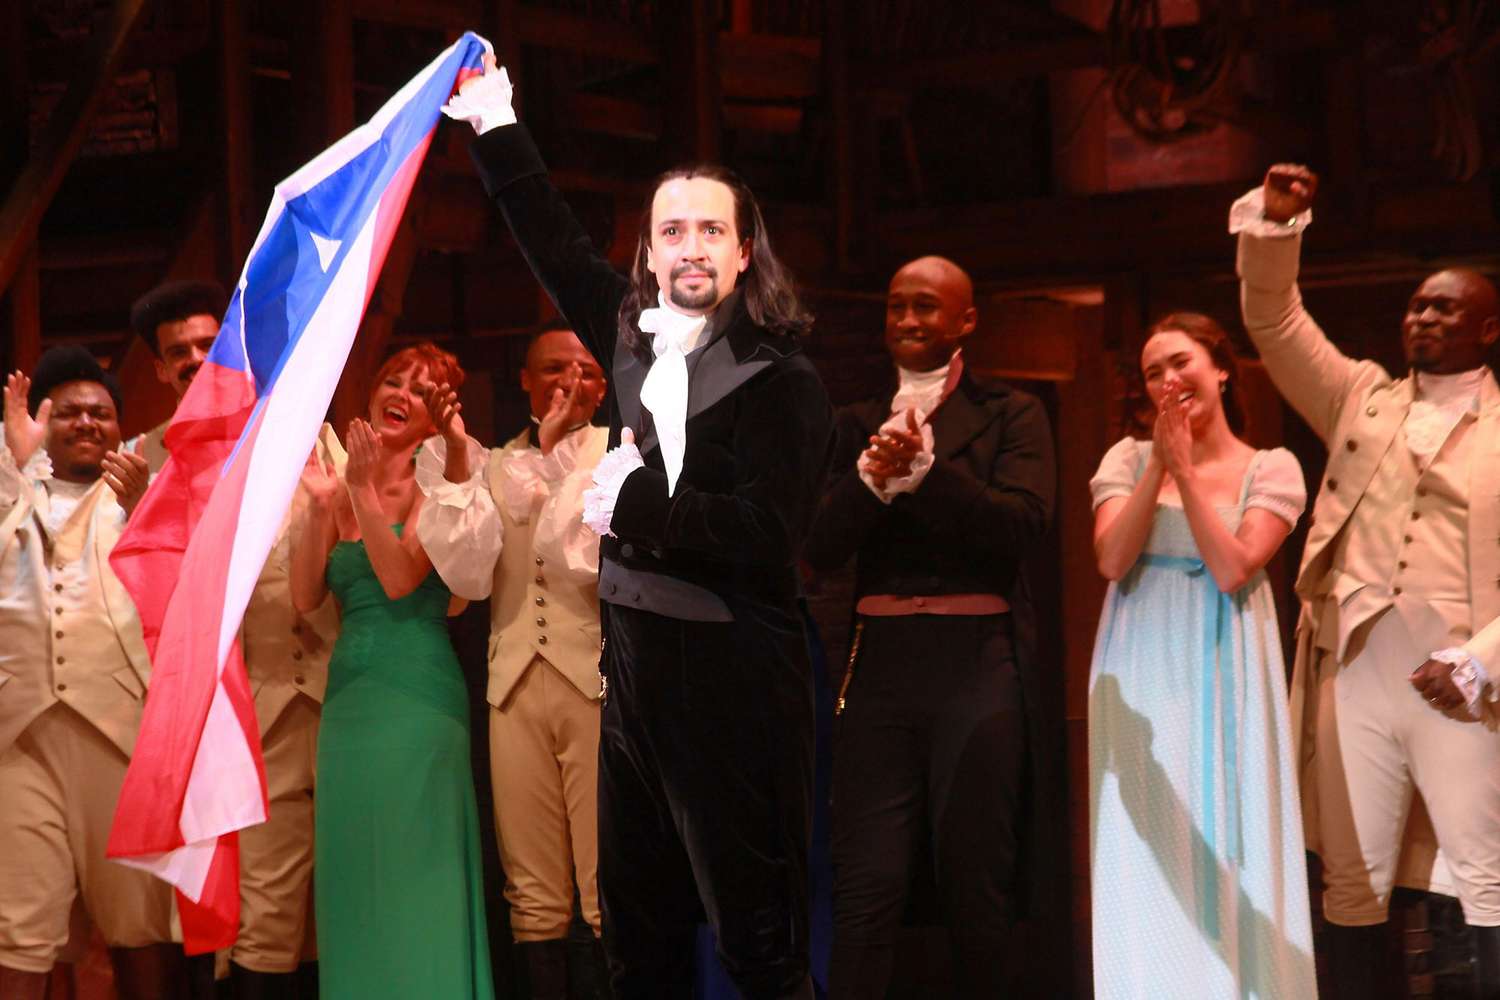 "Hamilton" Opening Night Curtain Call & Press Conference